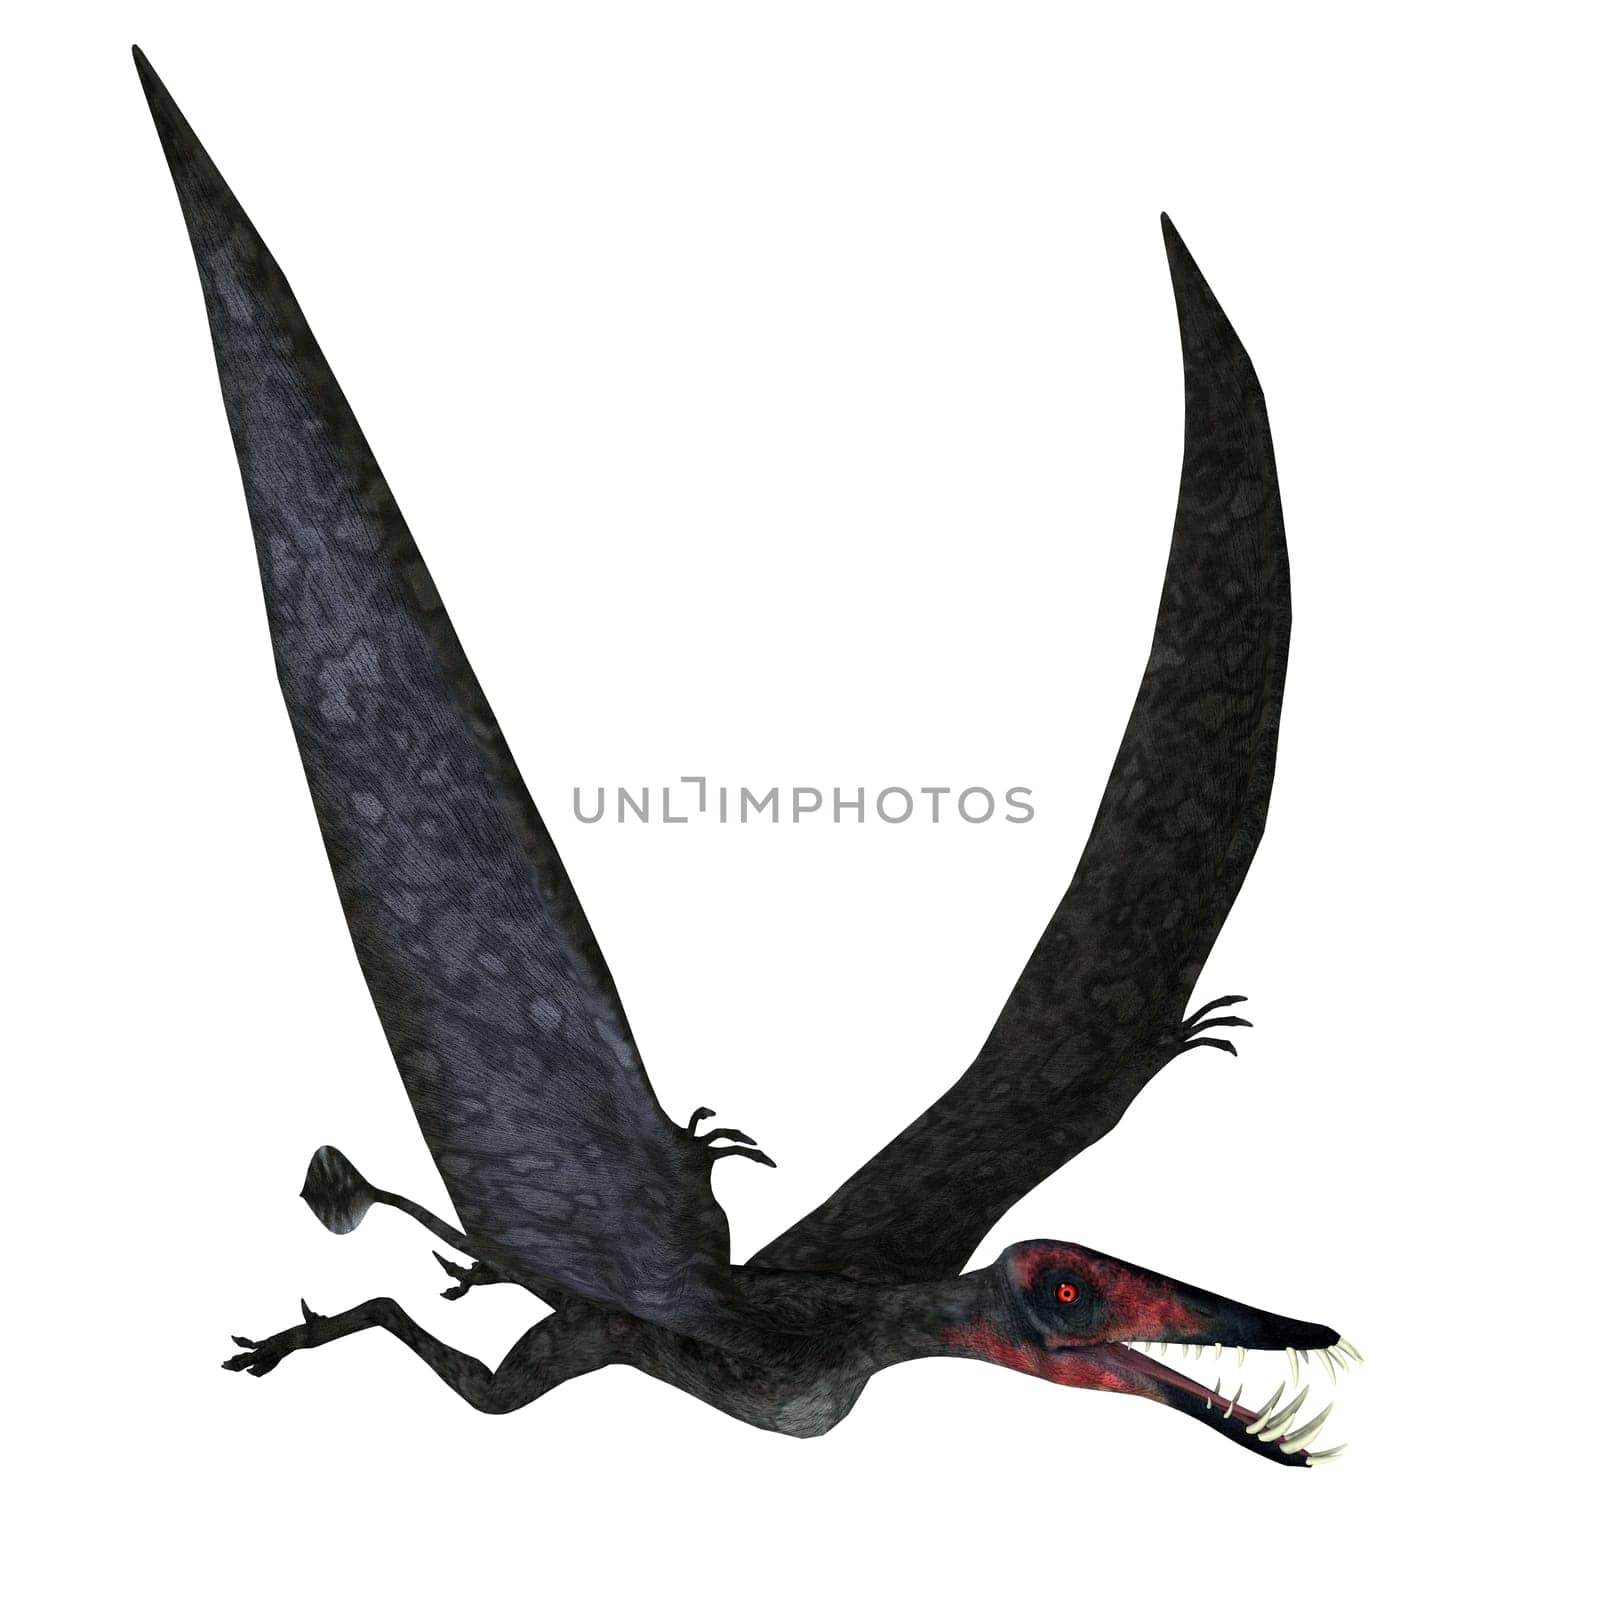 Dorygnathus was a genus of pterosaur that lived in Europe, Germany in the Jurassic Period.